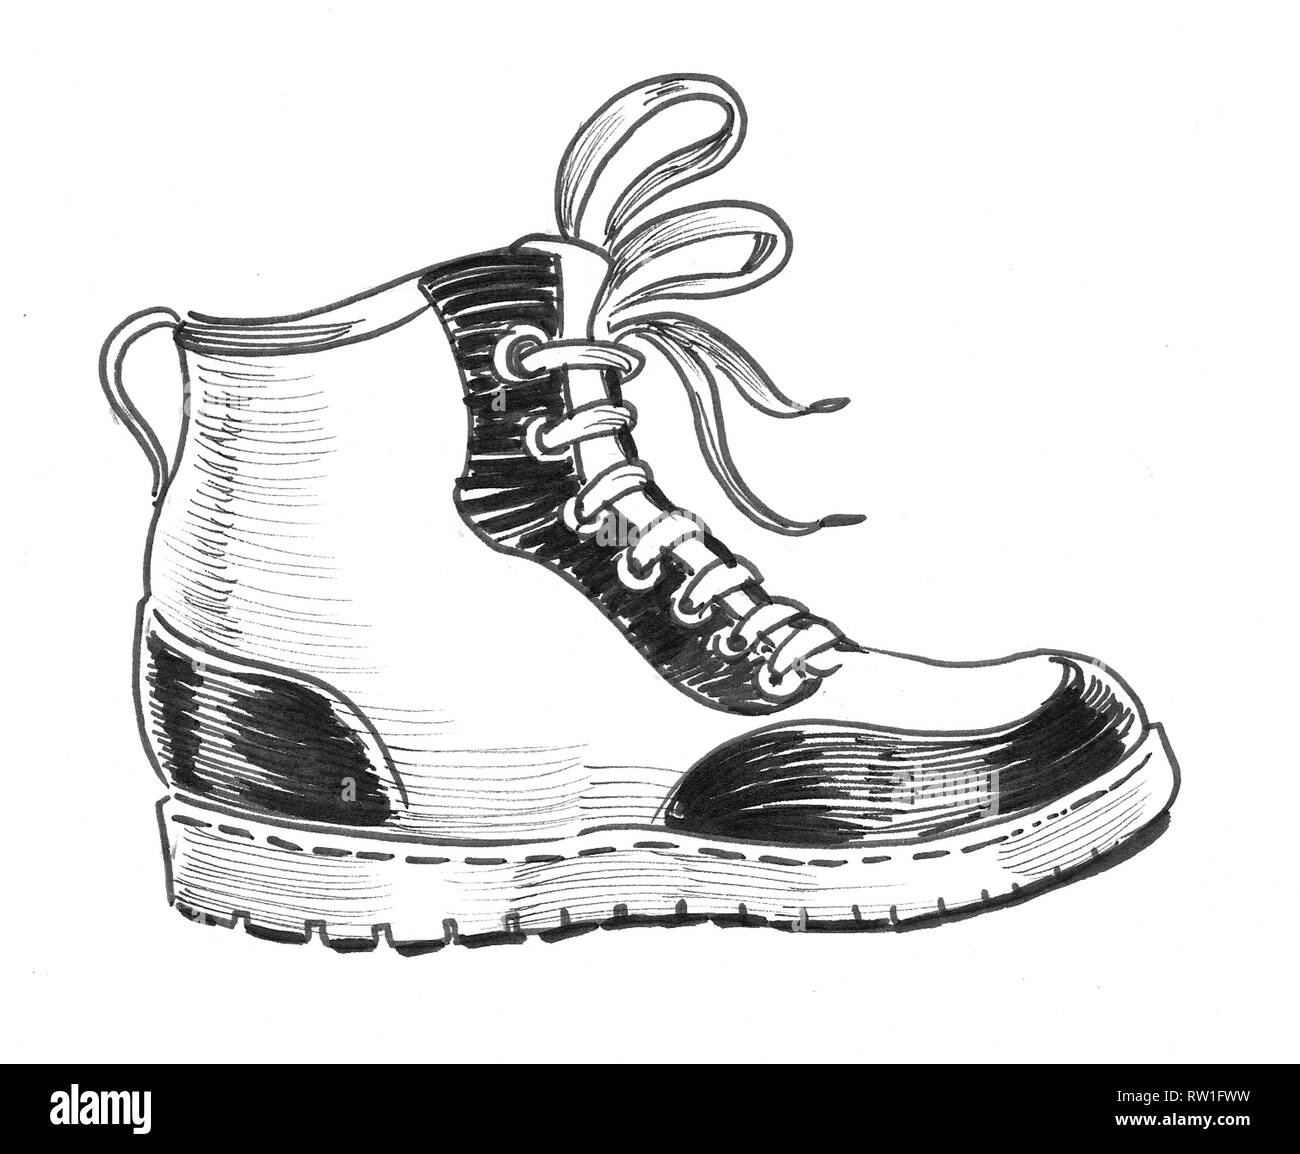 Vintage sport shoe. Ink black and white drawing Stock Photo - Alamy